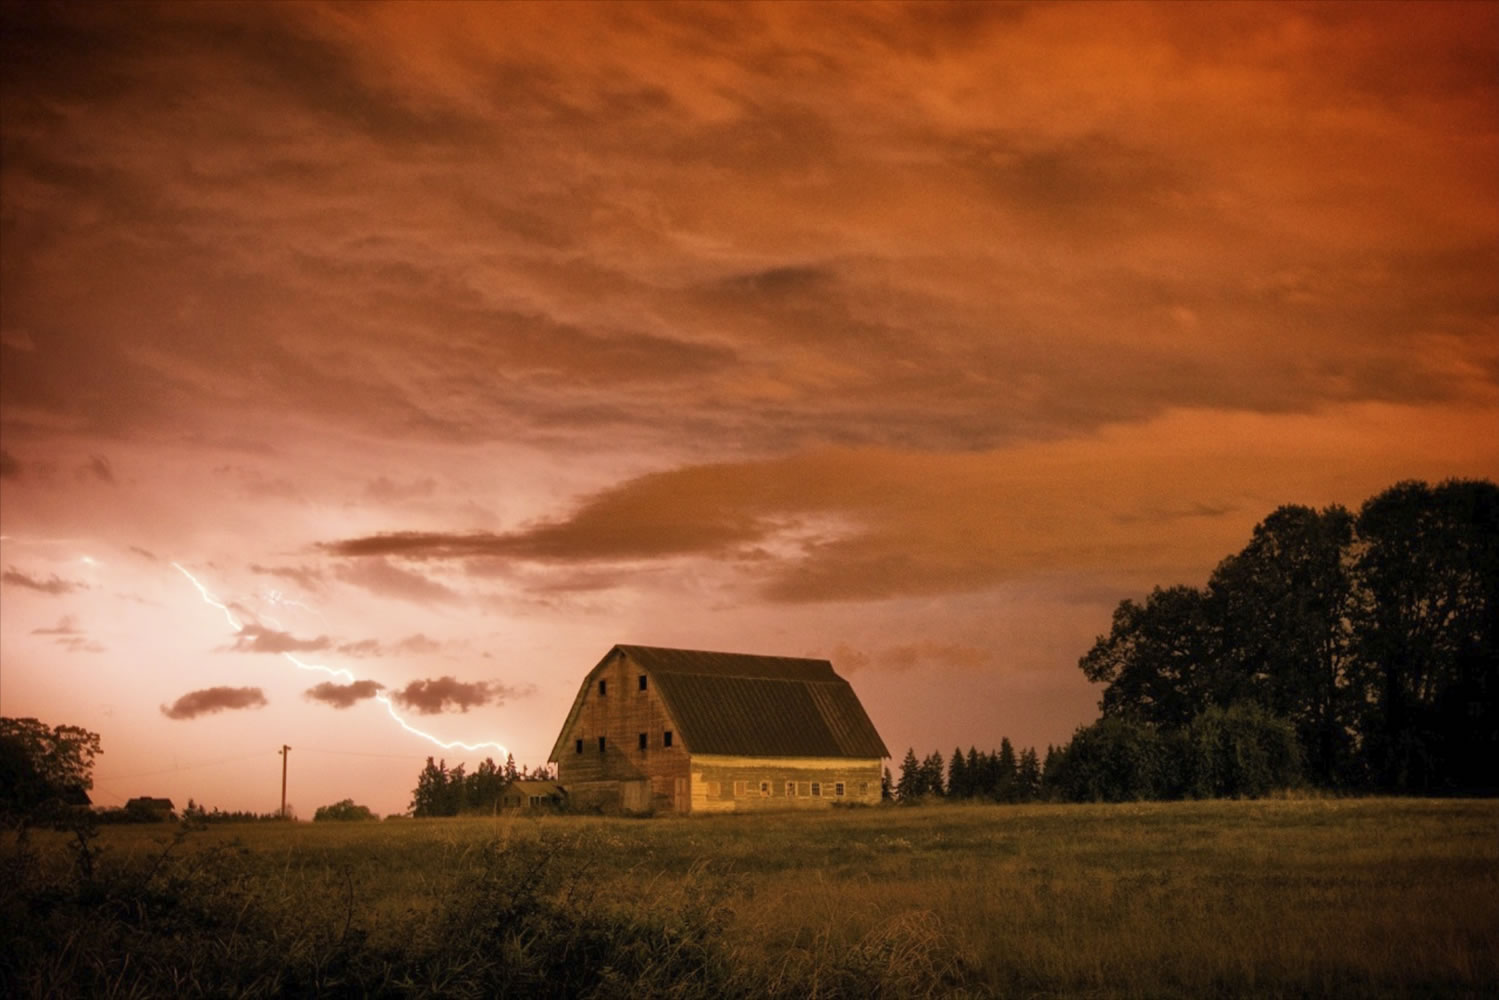 A lightning bolt lights up the sky over an old barn in Ridgefield early this morning. A total of 19 lightning strikes reached the ground in Clark County, according to the National Weather Service in Portland. The photo was shot at 2 a.m.